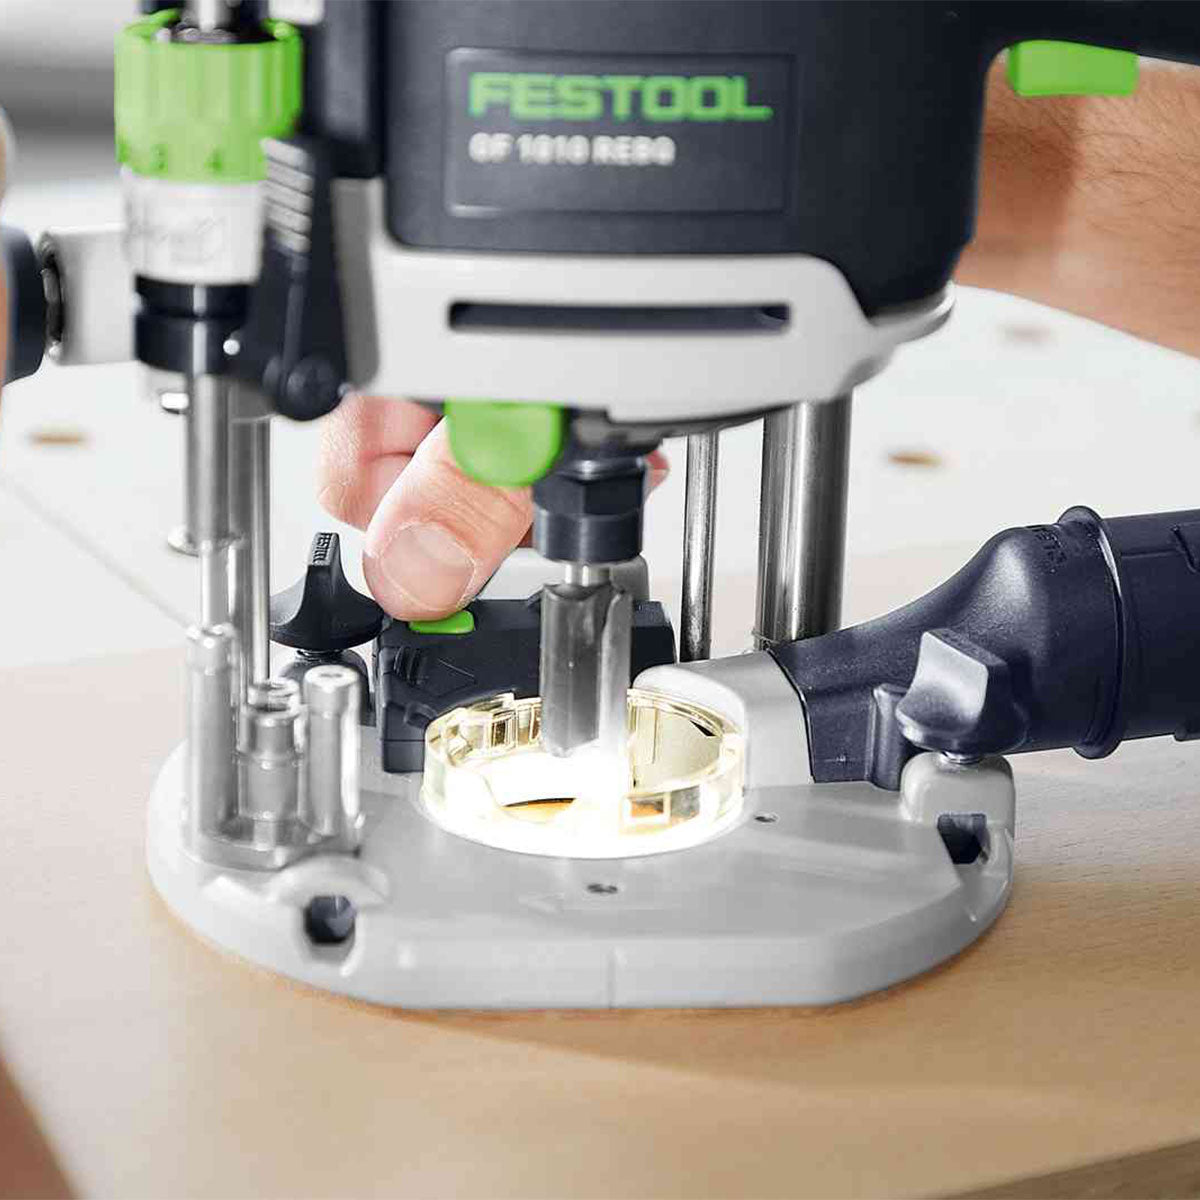 Festool OF 1010 REQ-Plus 110V GB Router Cutter - 578018 With 1 x Guide Rail FS 800/2